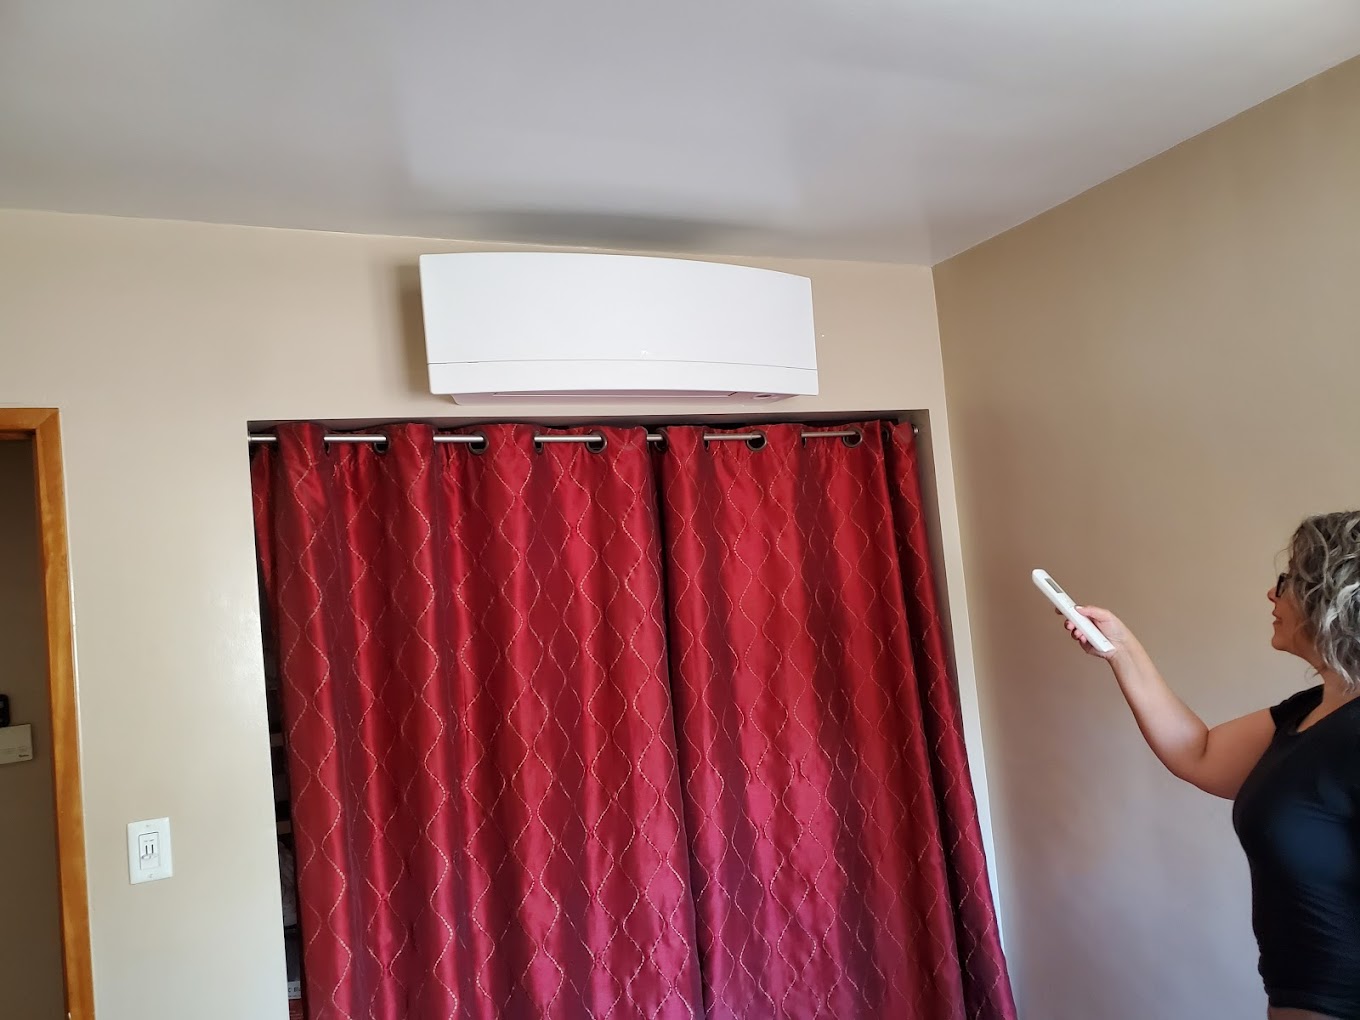 Dr. Ductless Heating & Cooling Los Angeles (213)916-0003